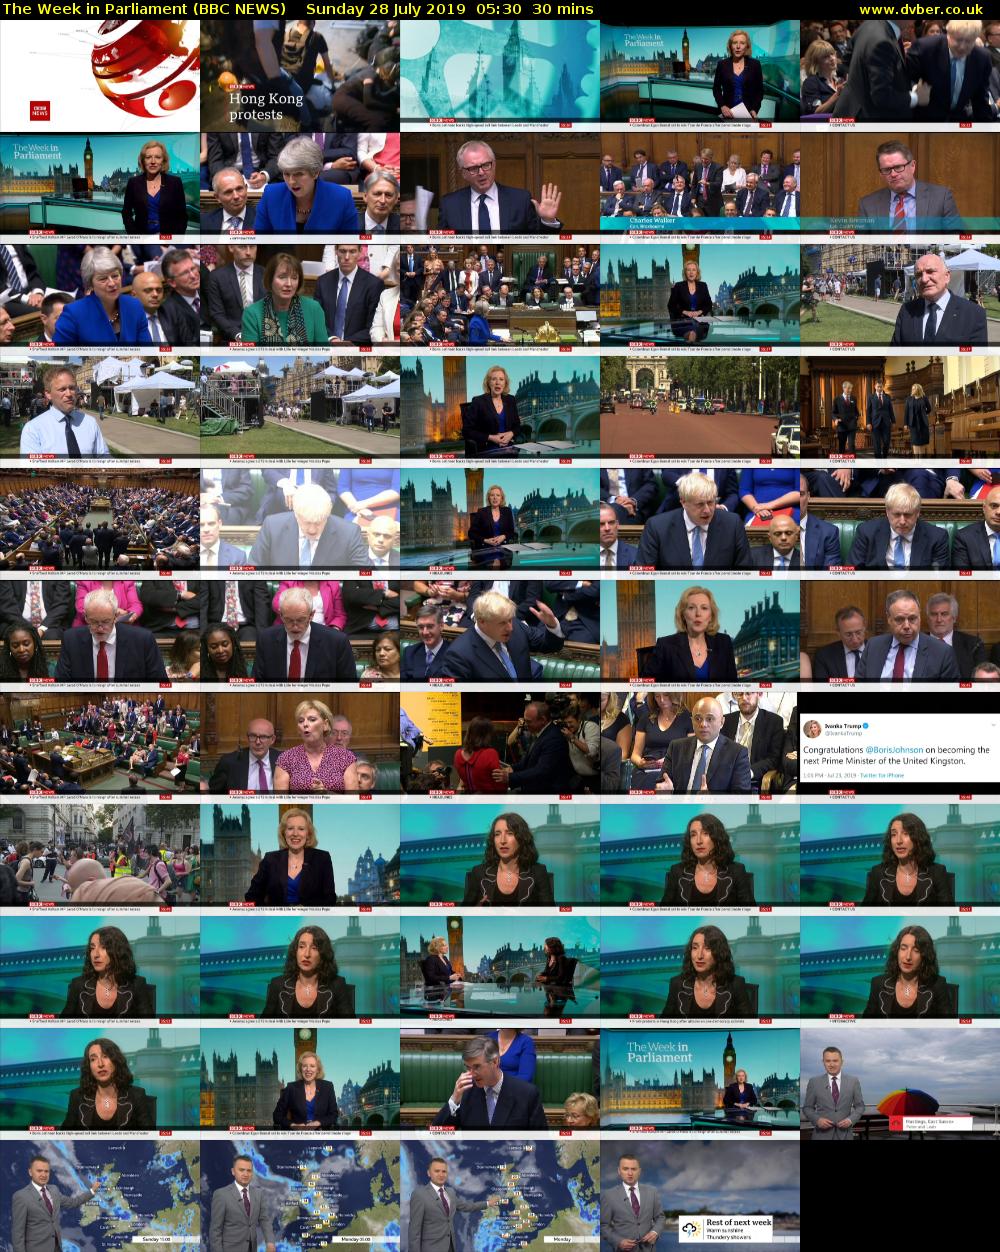 The Week in Parliament (BBC NEWS) Sunday 28 July 2019 05:30 - 06:00